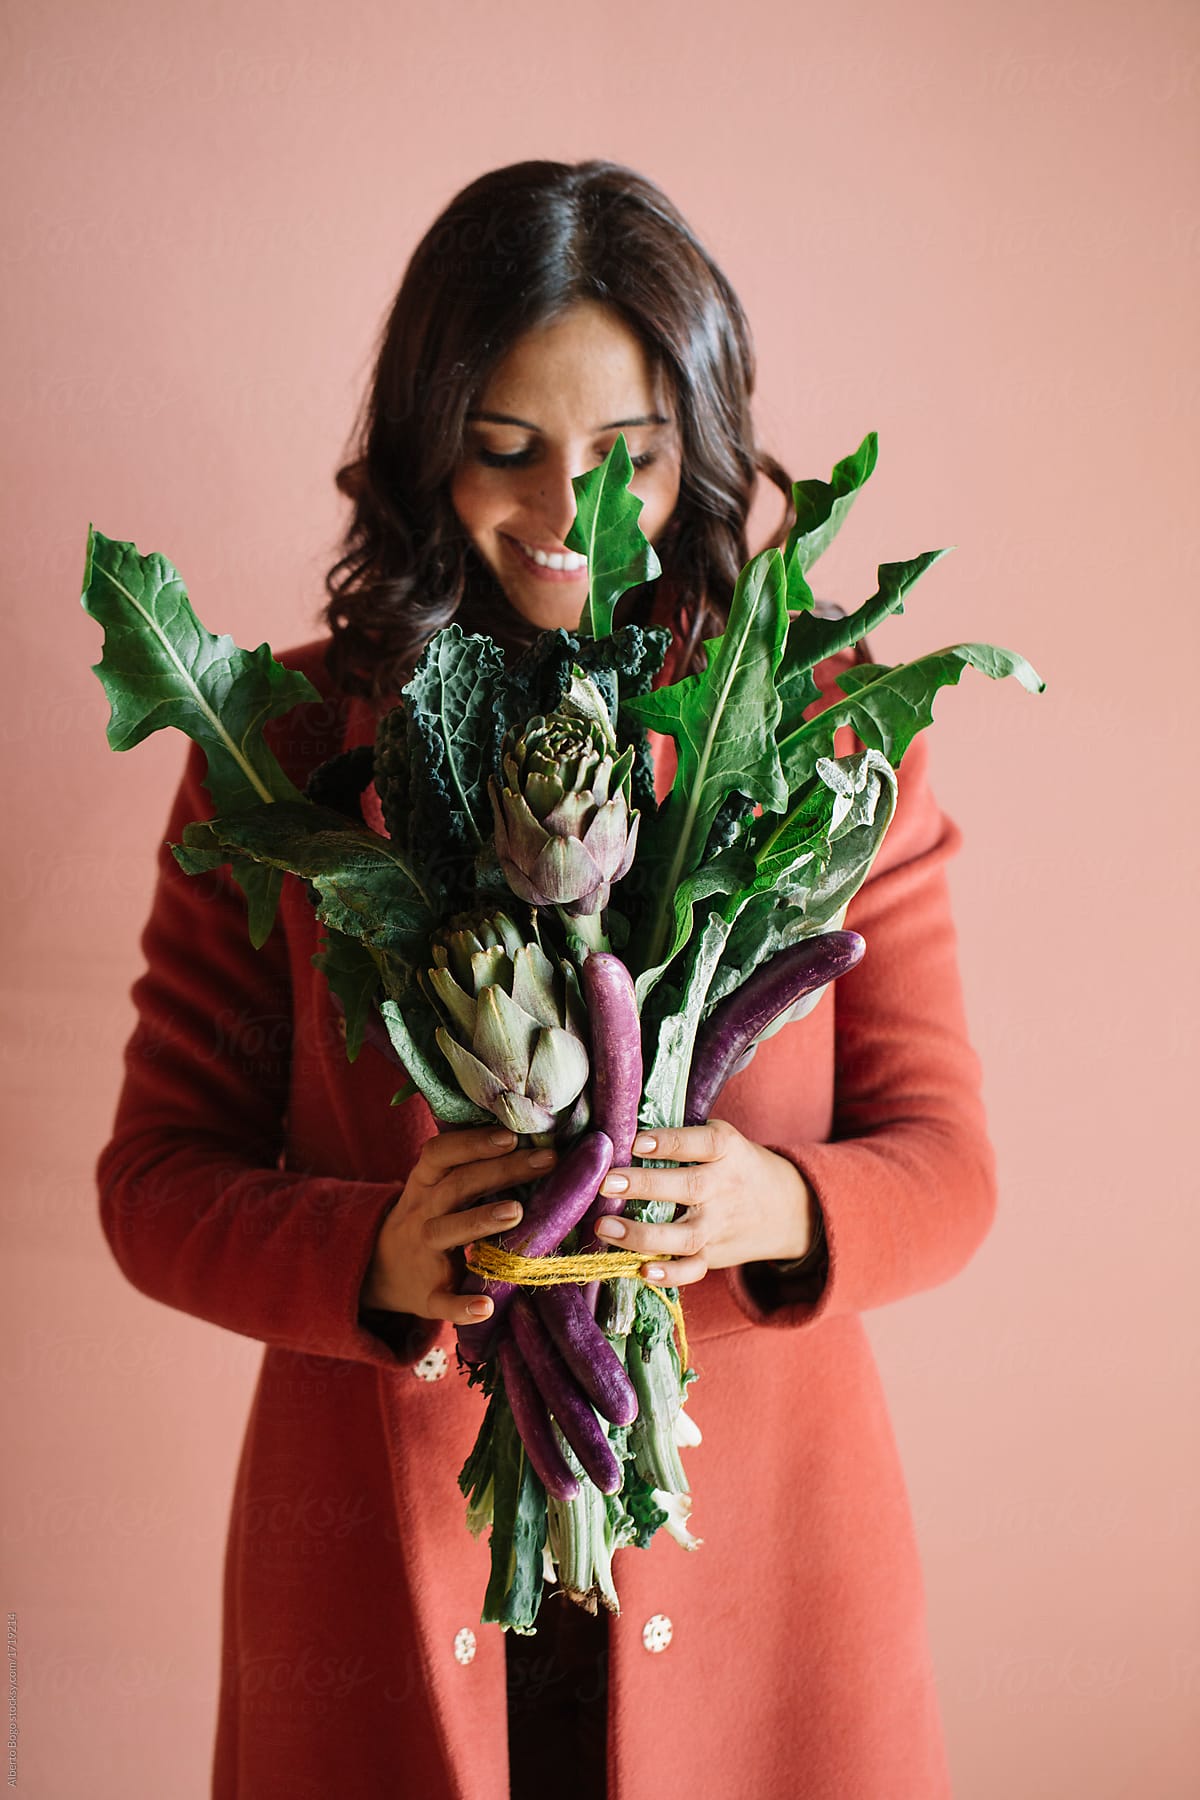 Cheerful model with vegetable bouquet